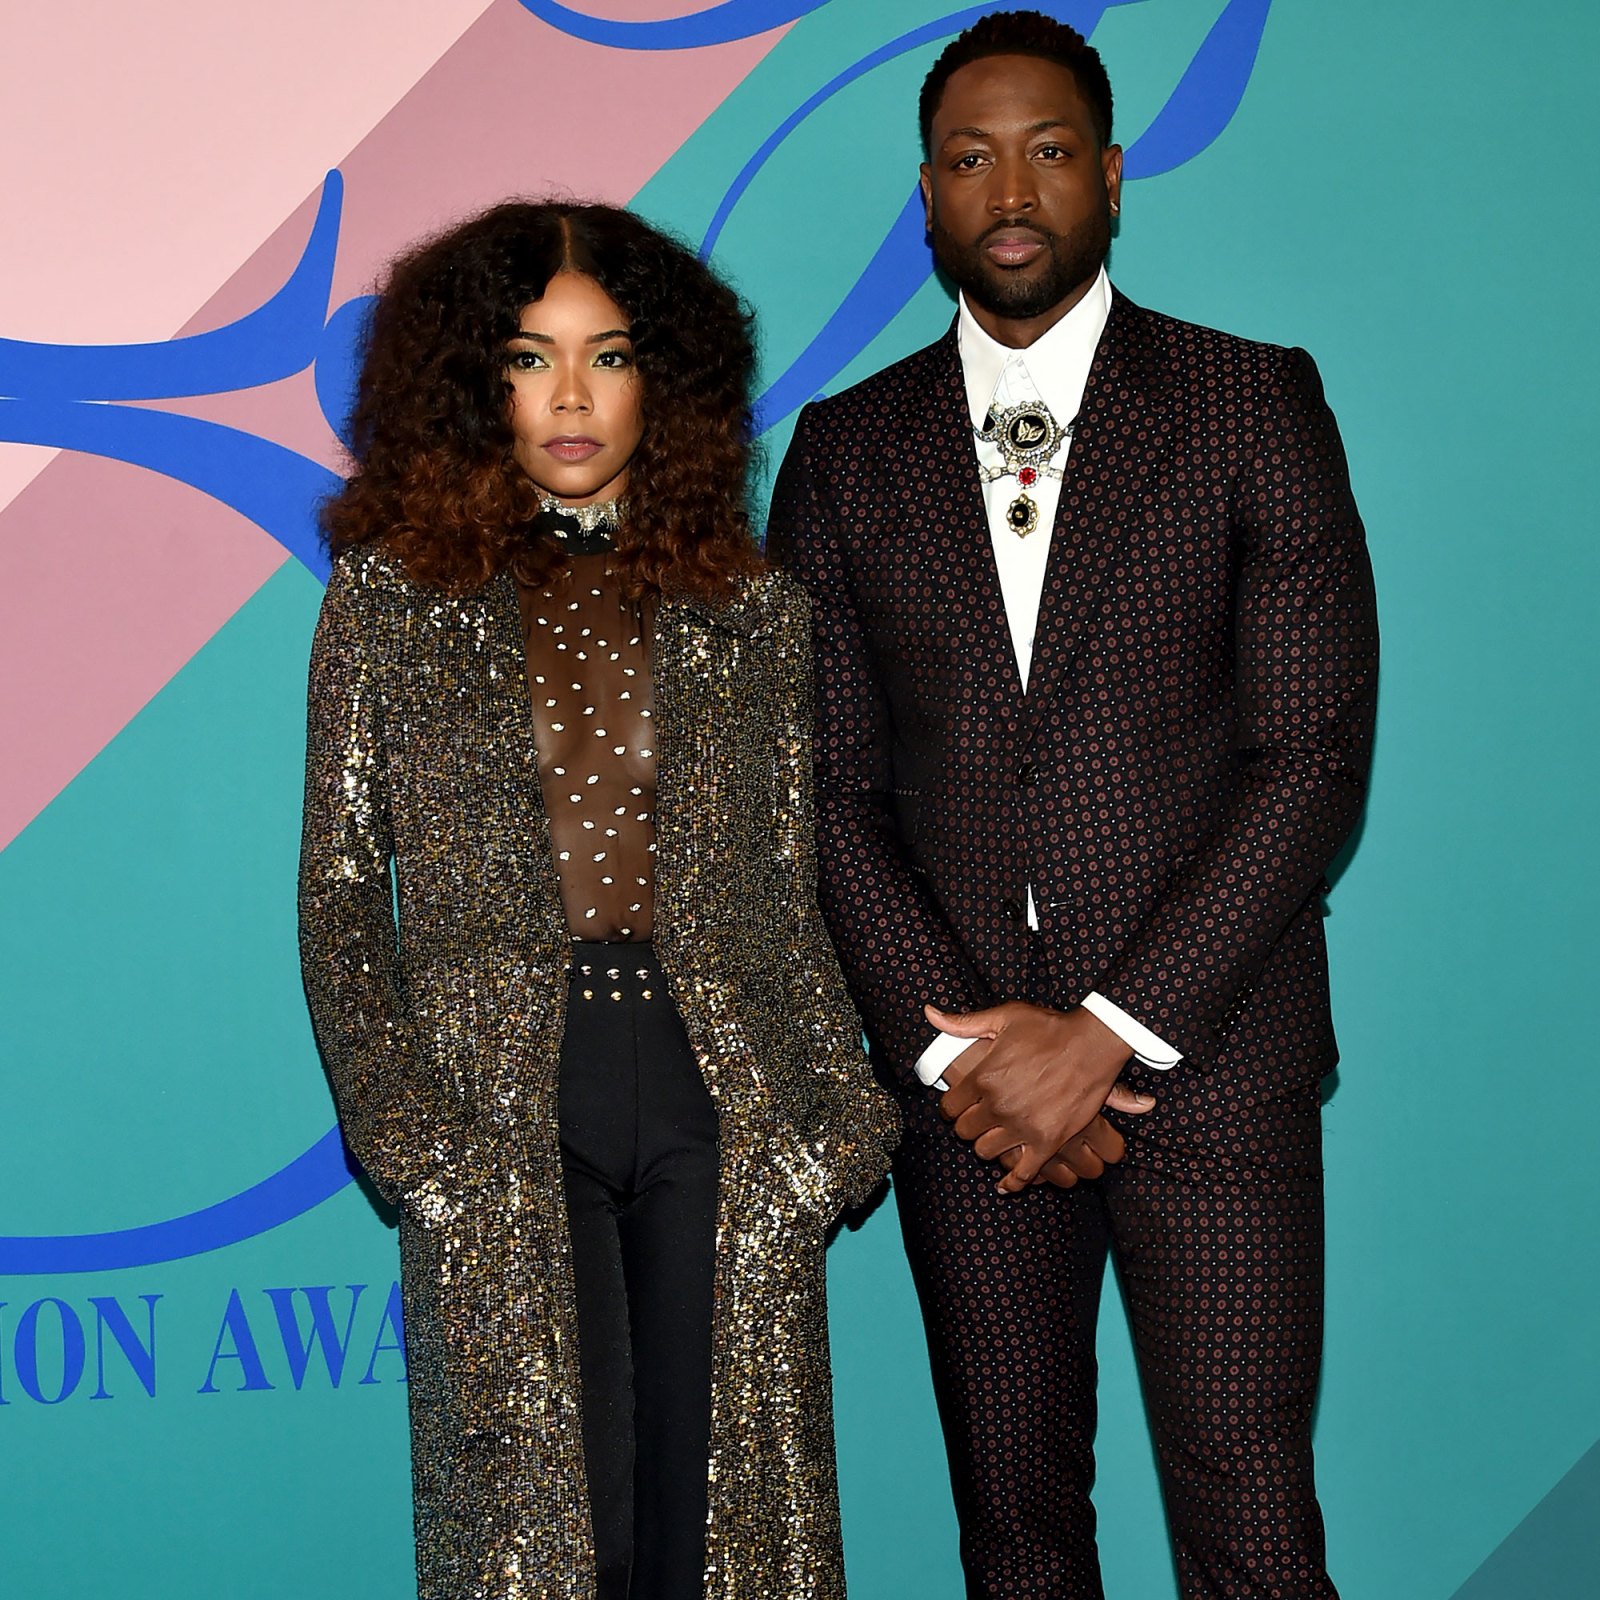 Gabrielle Union Dwyane Wade On Him Fathering A Child During Split